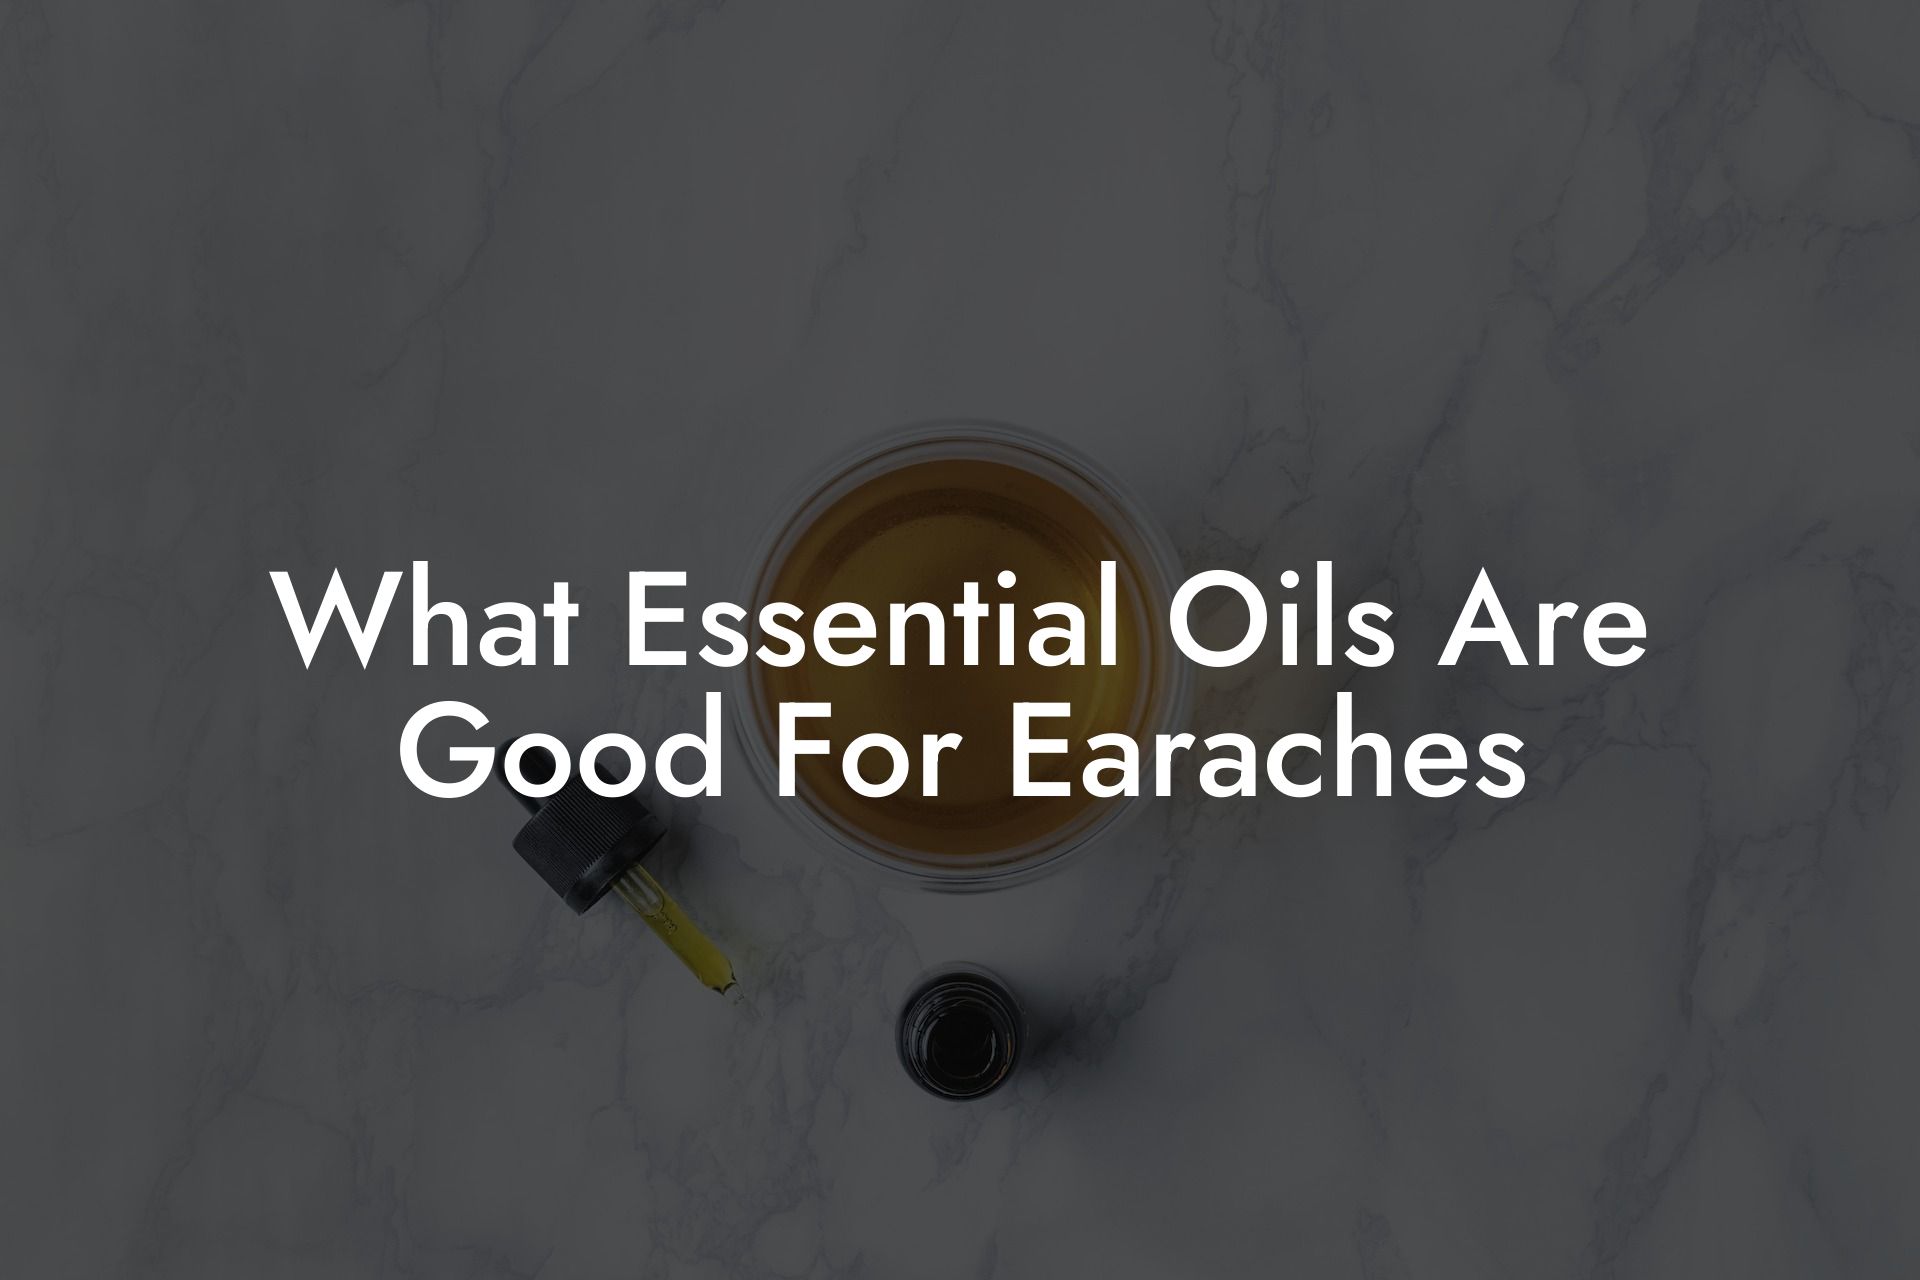 What Essential Oils Are Good For Earaches